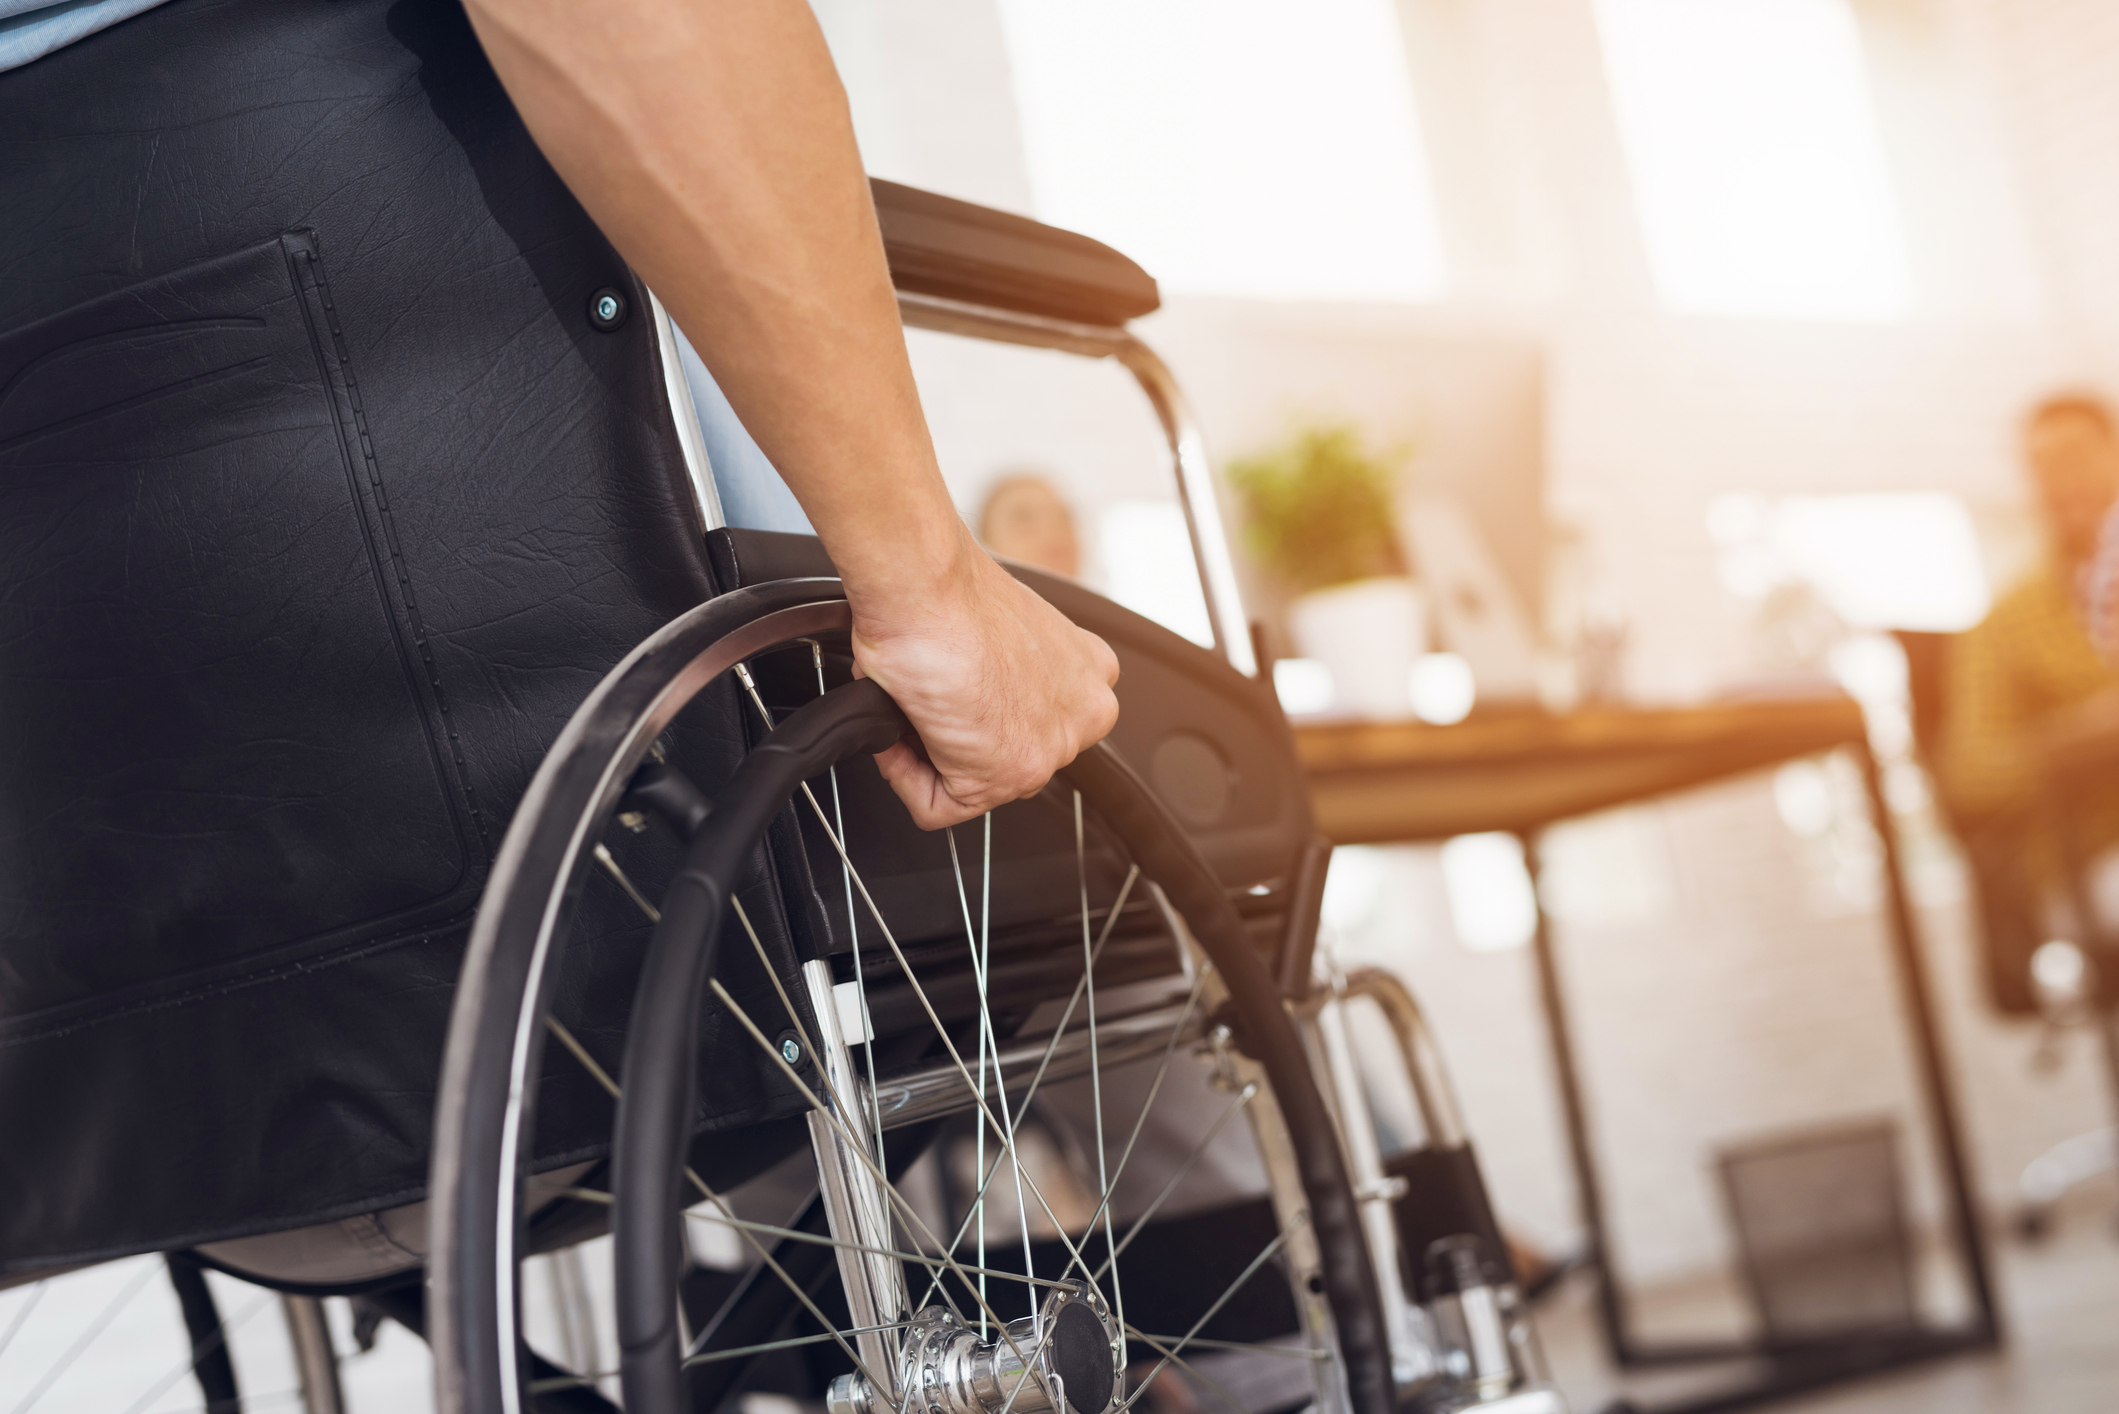 Workers comp claim provides injured workers with medical treatment